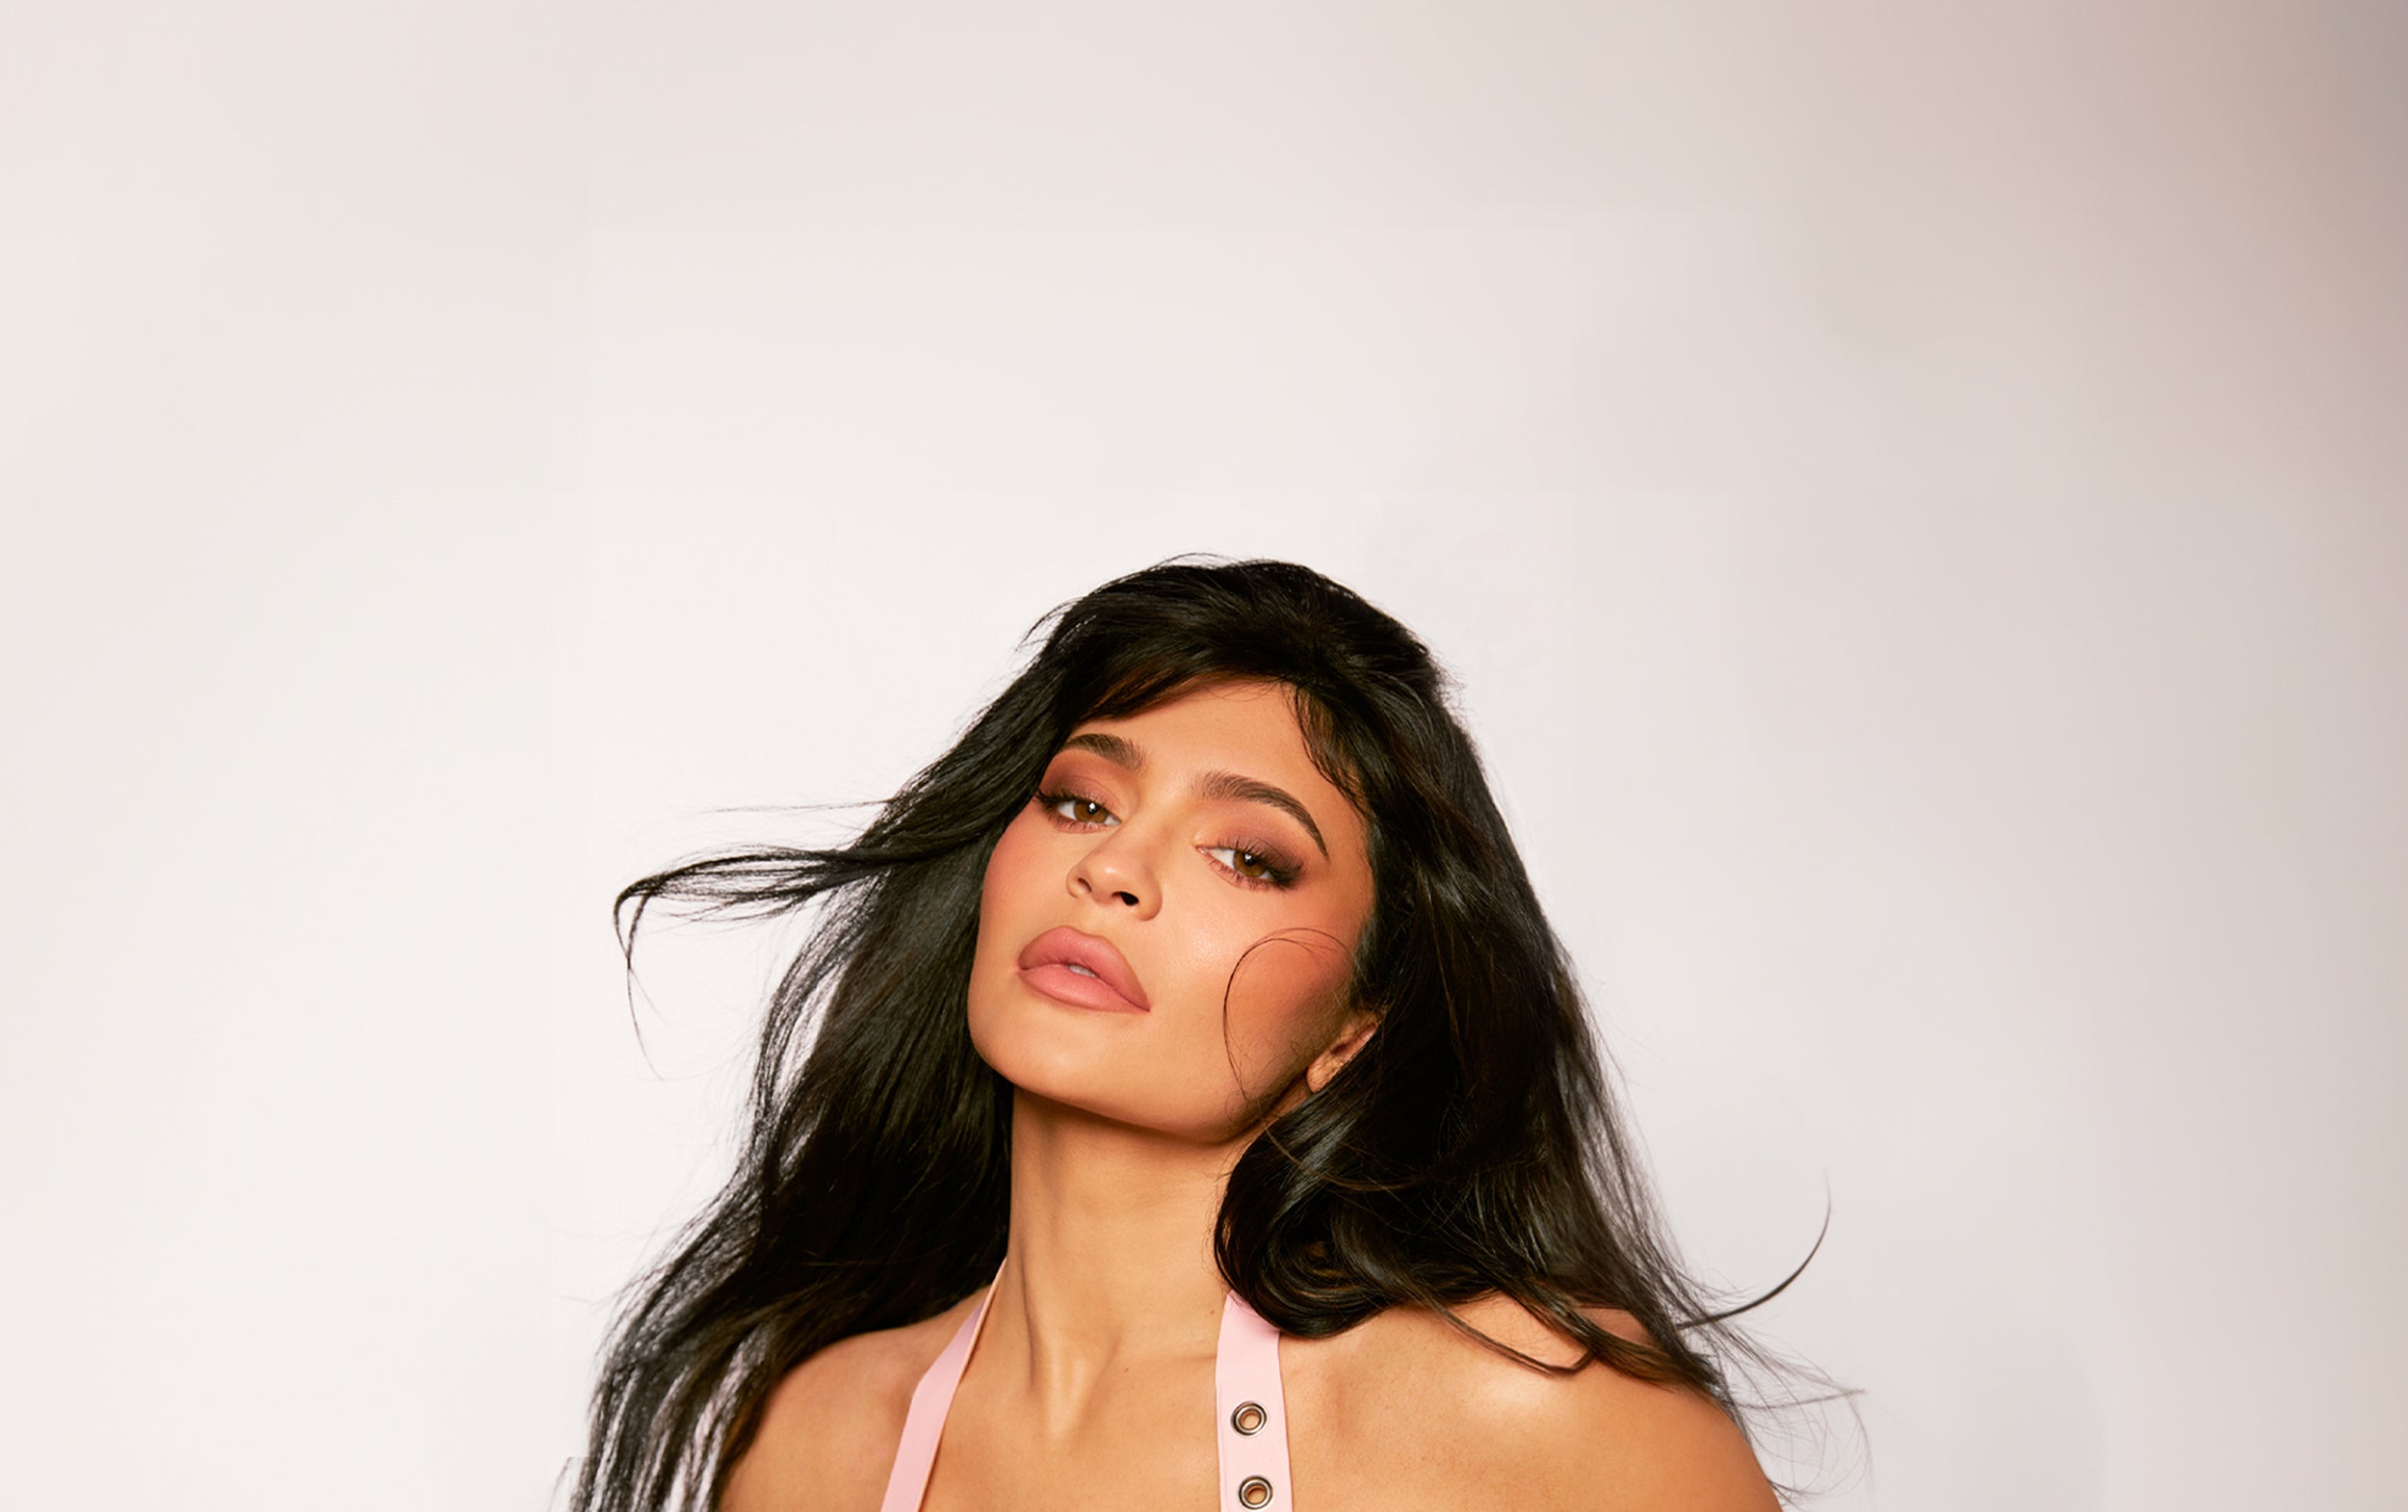 Kylie Cosmetics | Kylie Cosmetics by Kylie Jenner